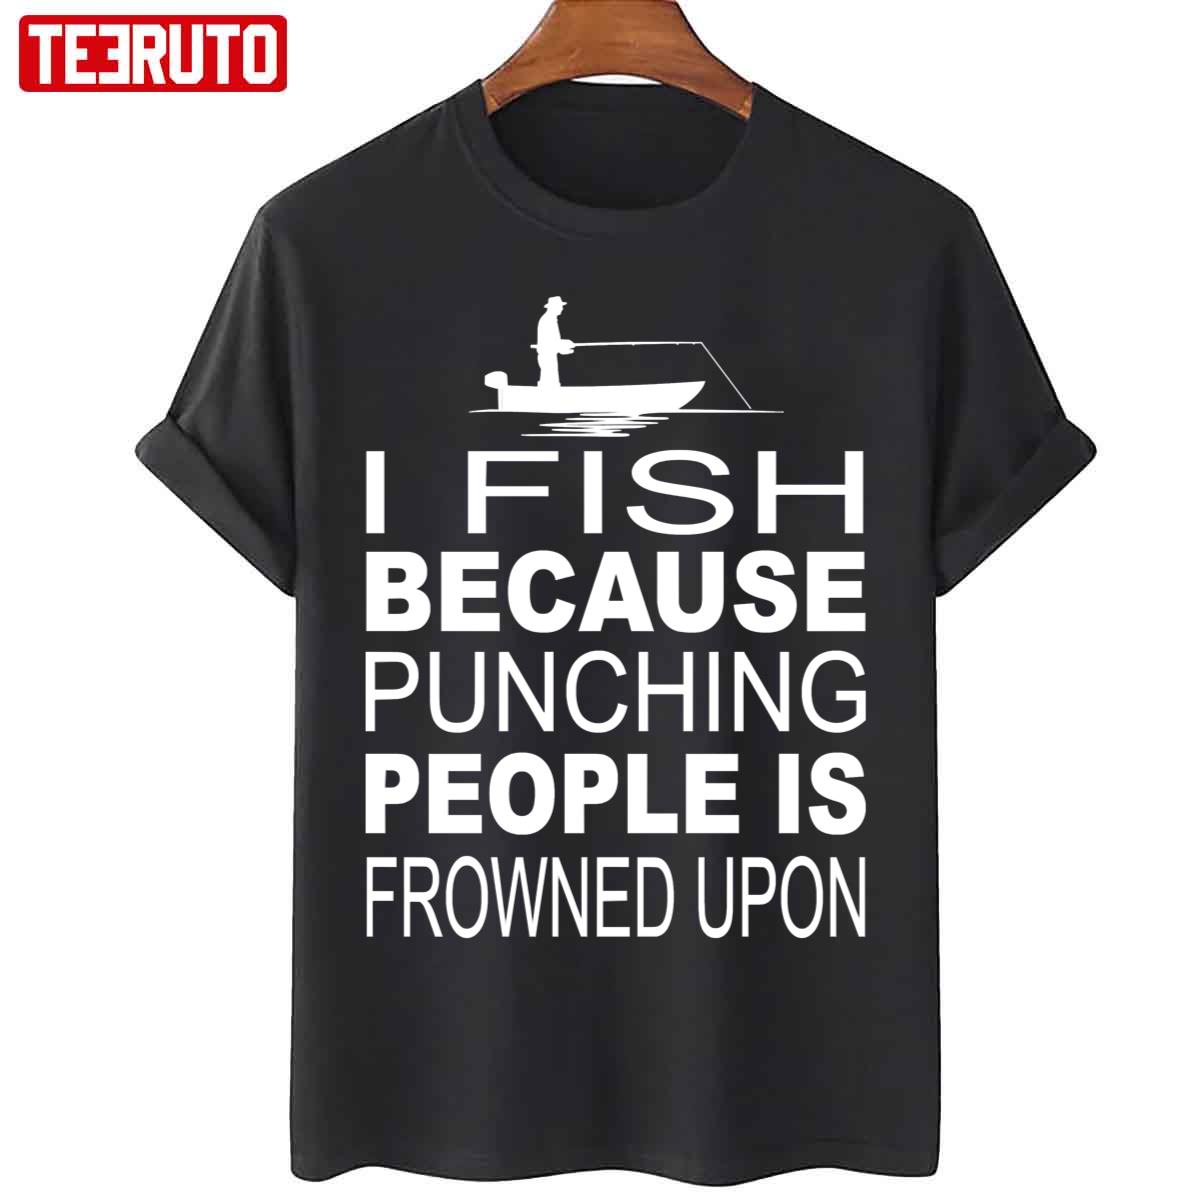 I Fish Because Punching People Is Frowned Upon Unisex T-Shirt